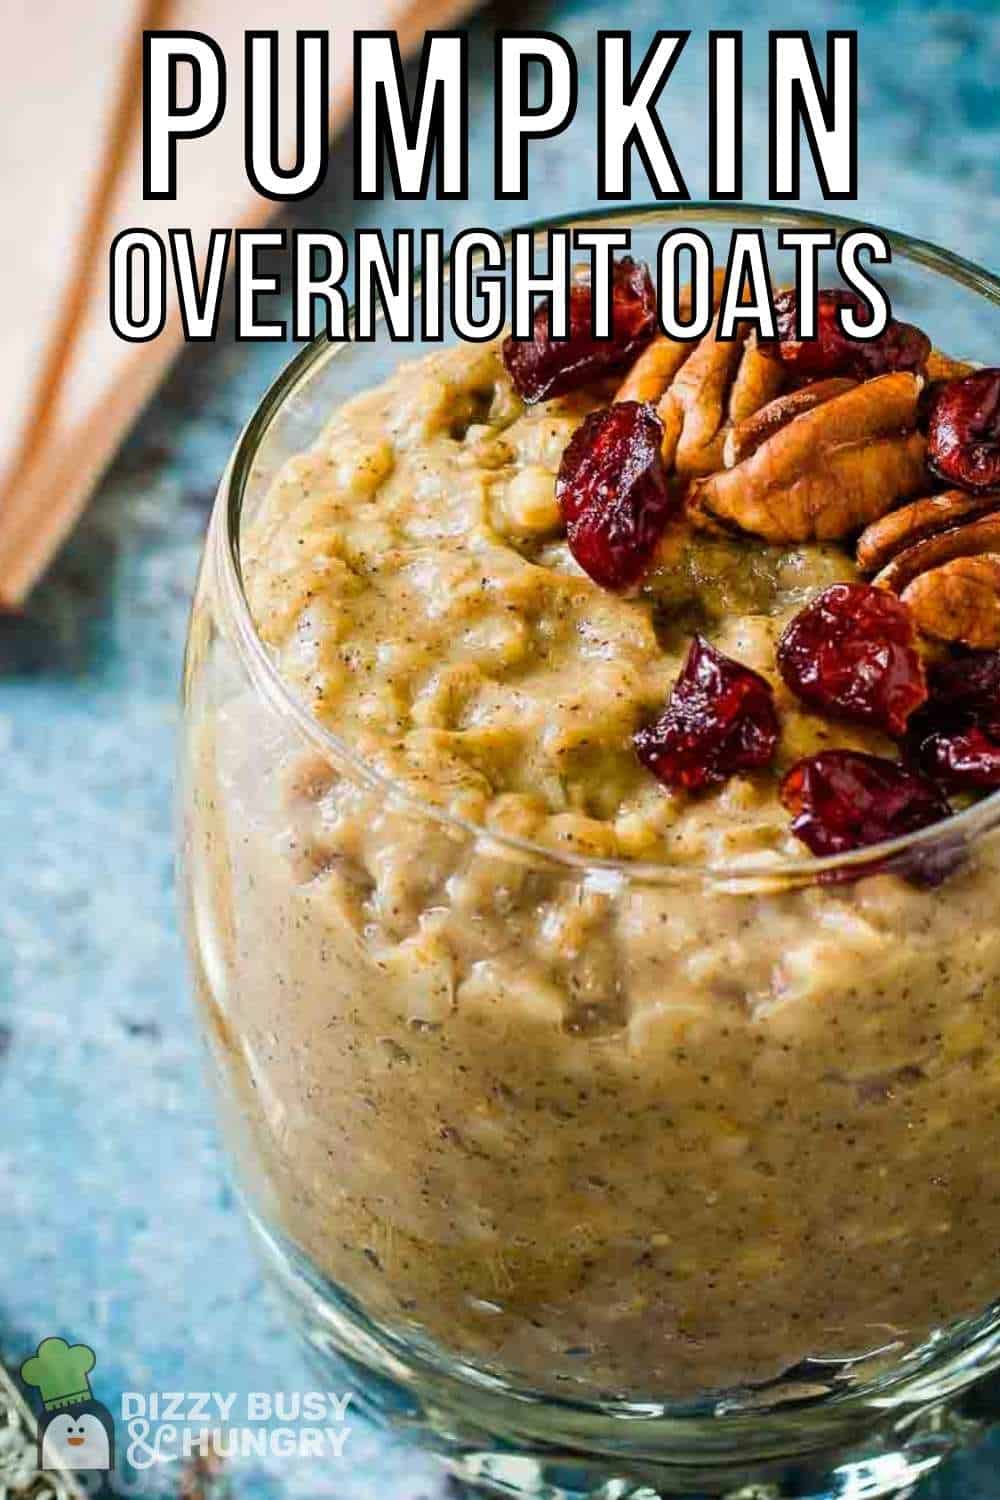 Pumpkin Overnight Oats - Dizzy Busy and Hungry!